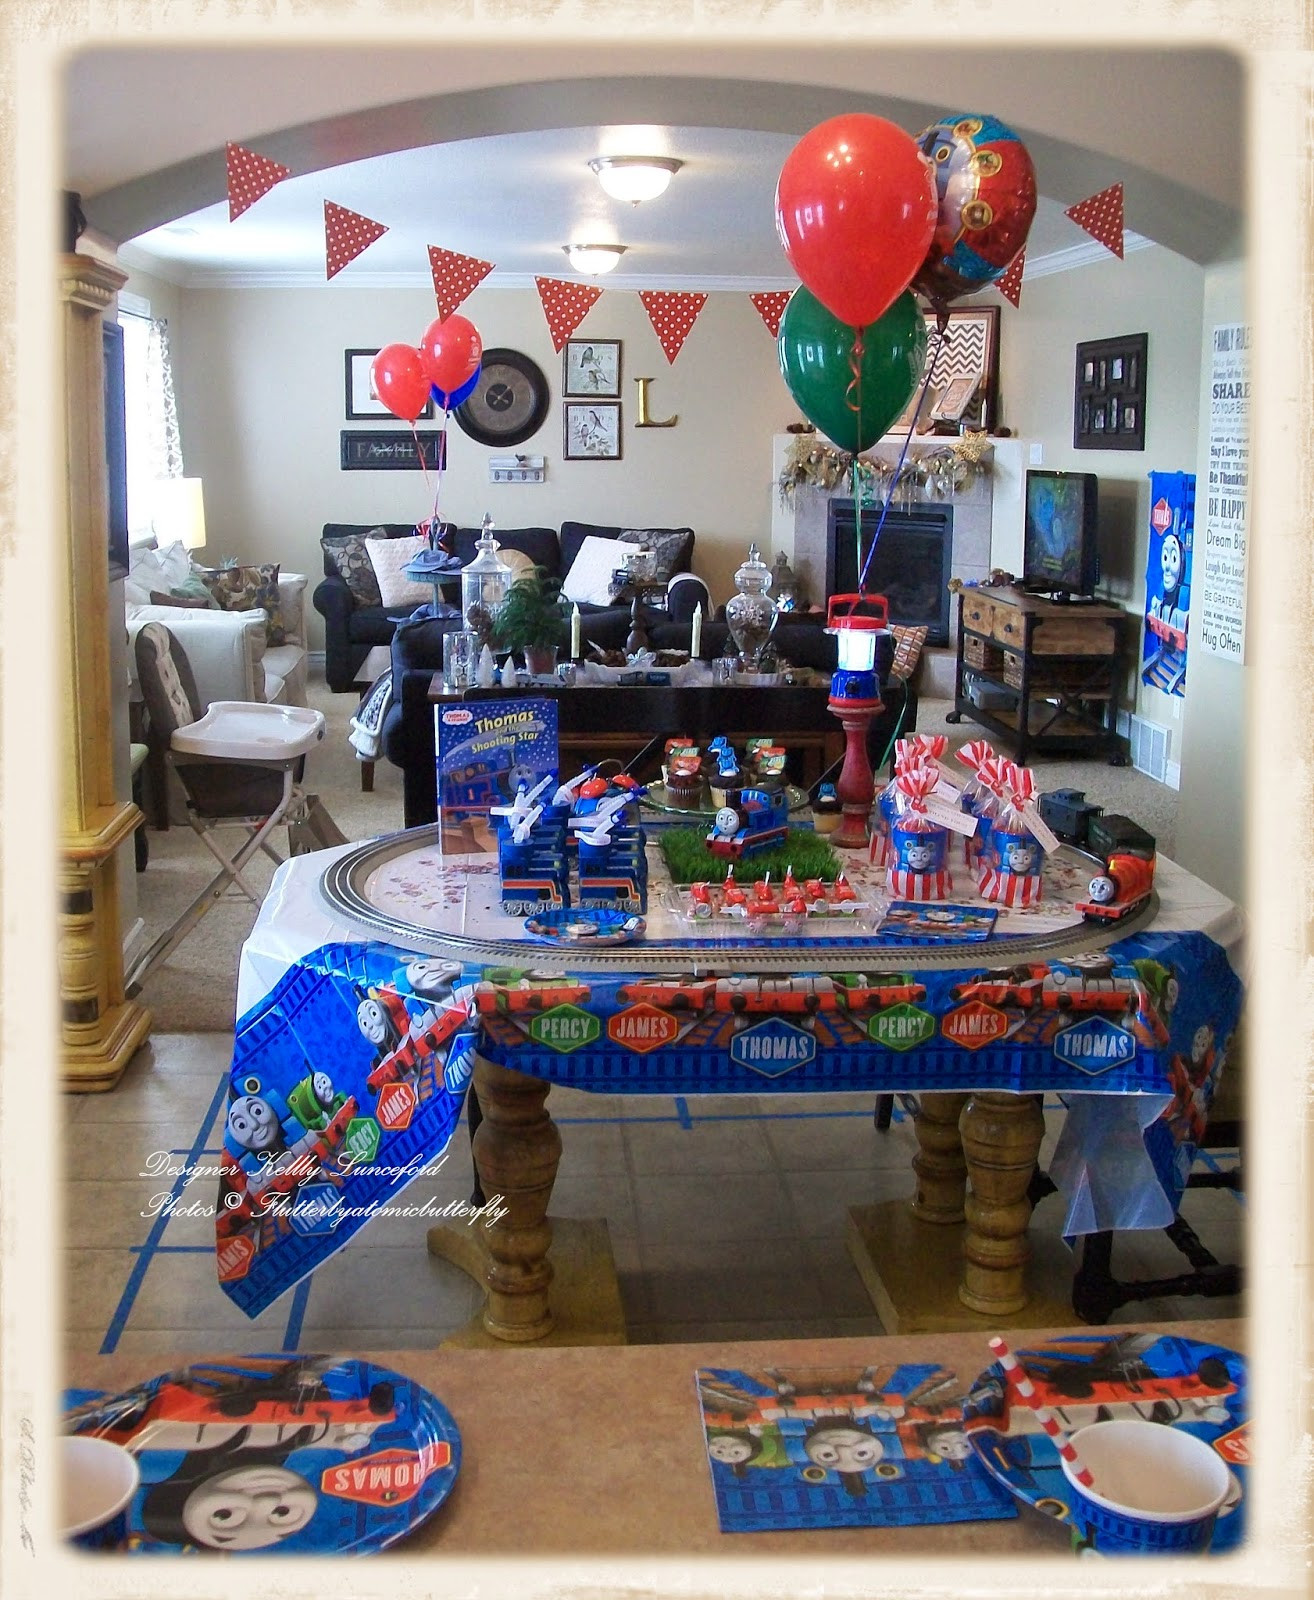 Thomas Birthday Decorations
 Flutter by Atomicbutterfly Thomas the Tank Engine 5th